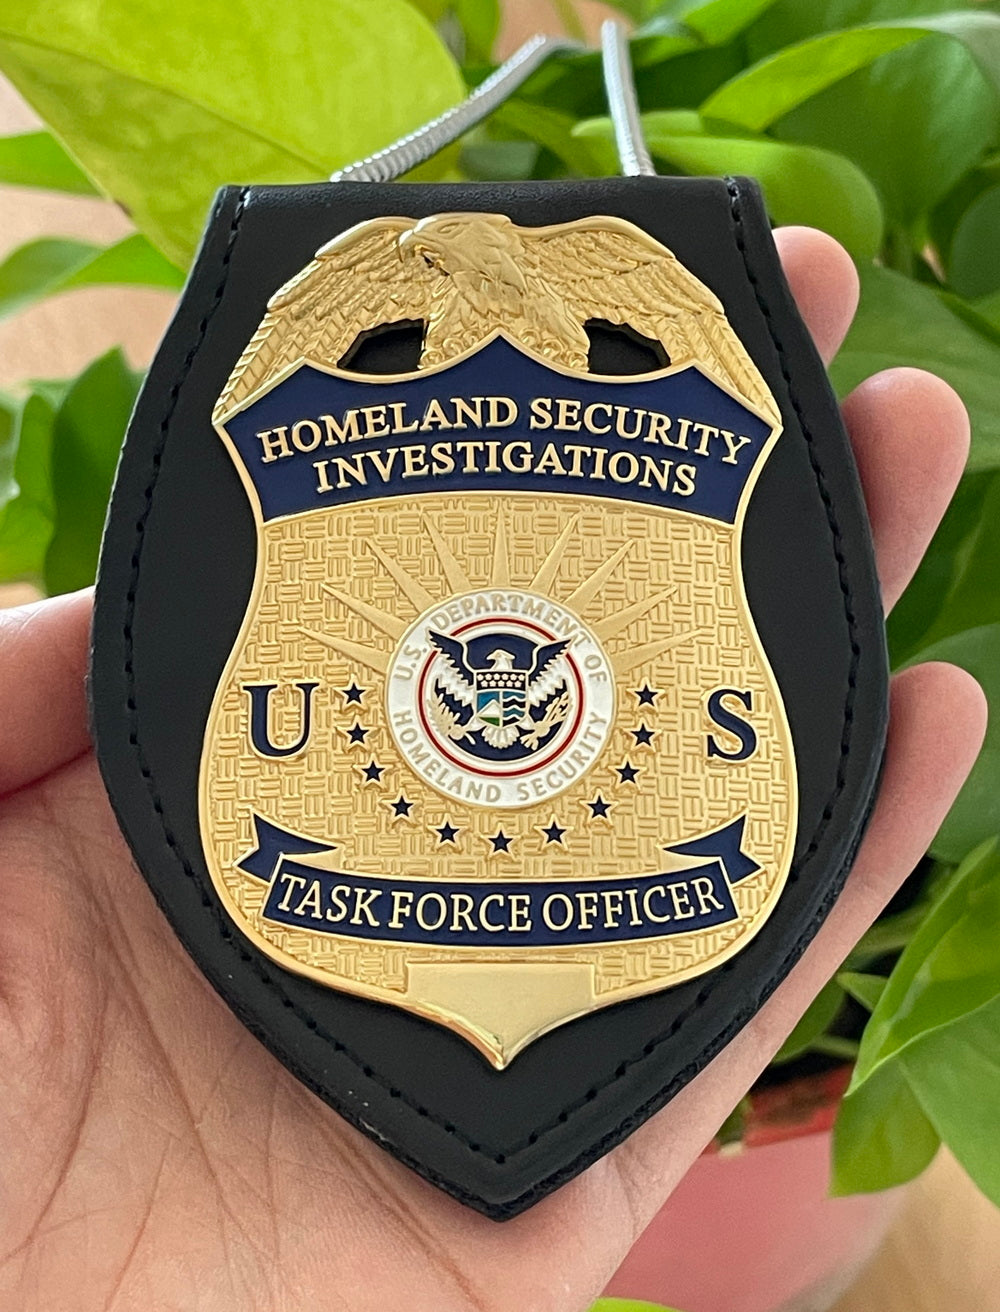 US HSI TFO Task Force Officer Badge Homeland Security Investigations Replica Movie Props Gold